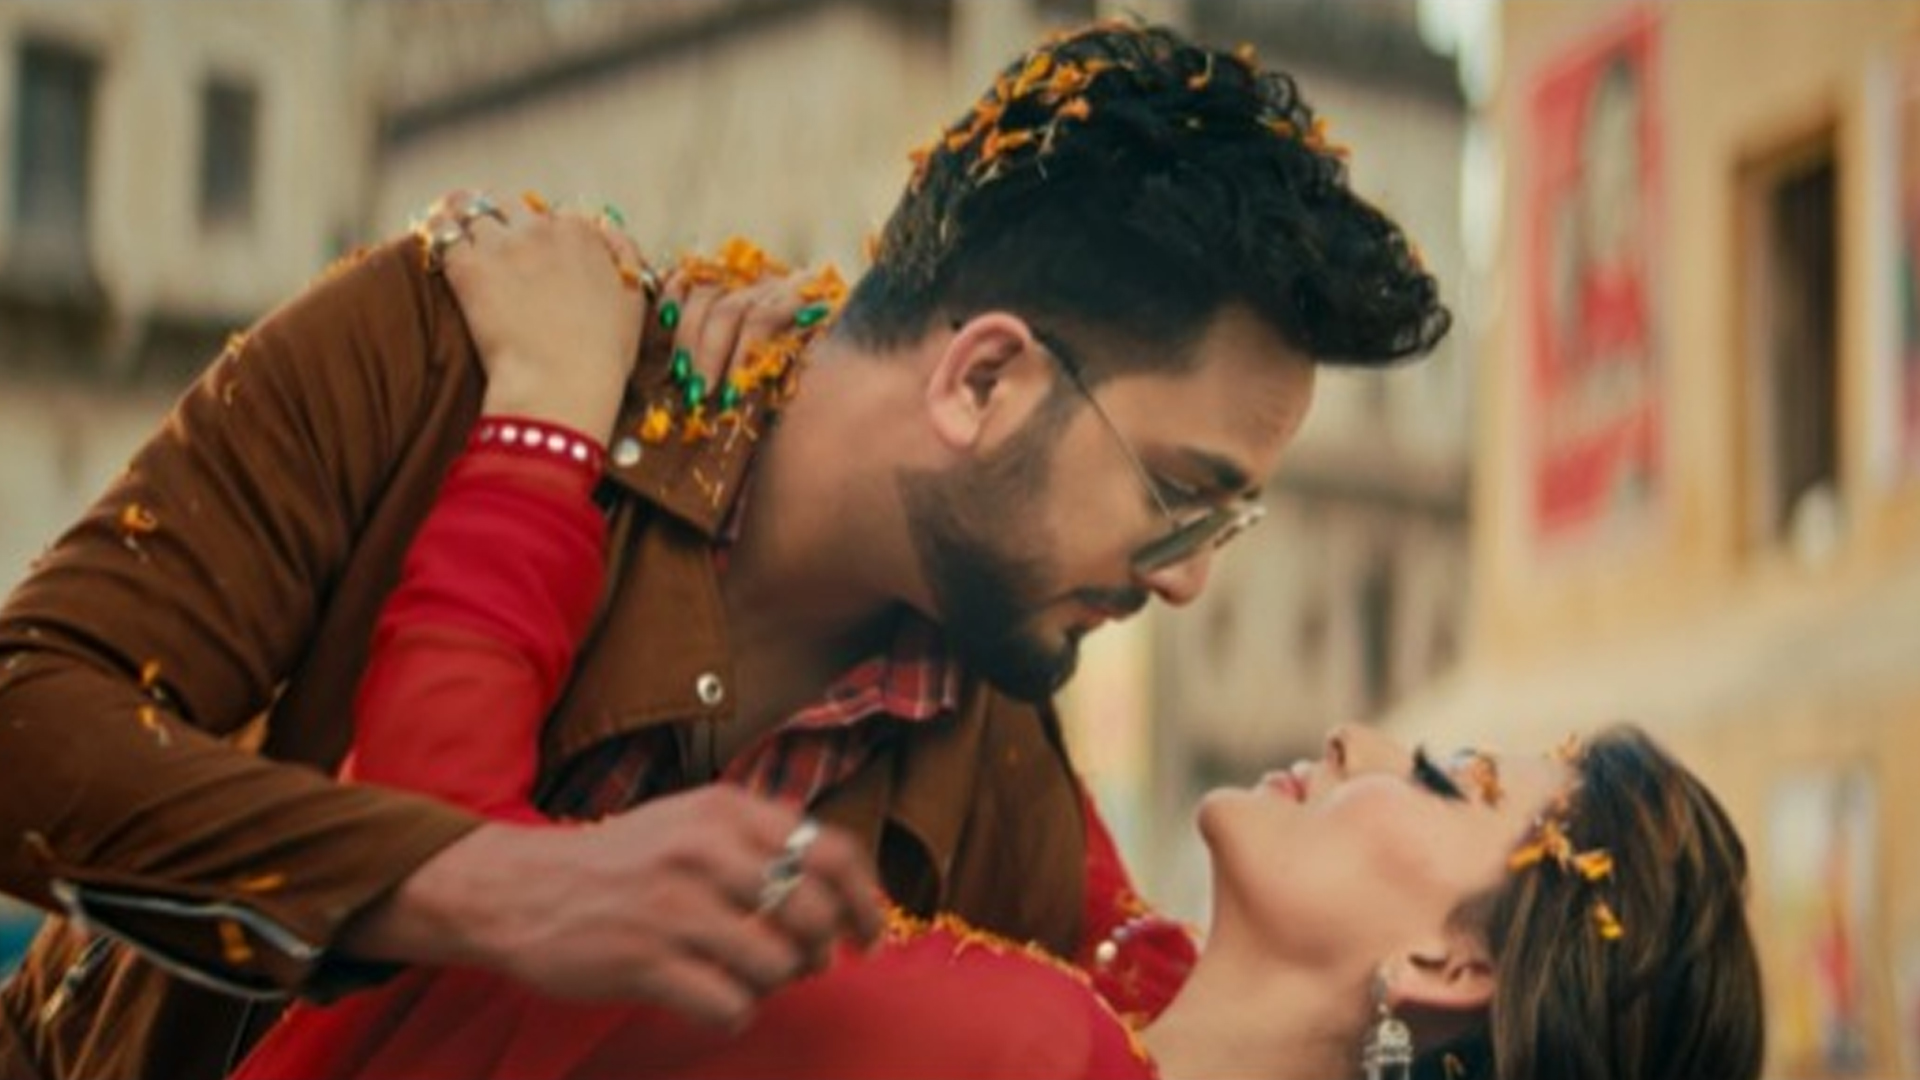 Urvashi Rautela and Elvish Yadav’s “Hum To Deewane”: Song Releases A Love Song to Remember Forever